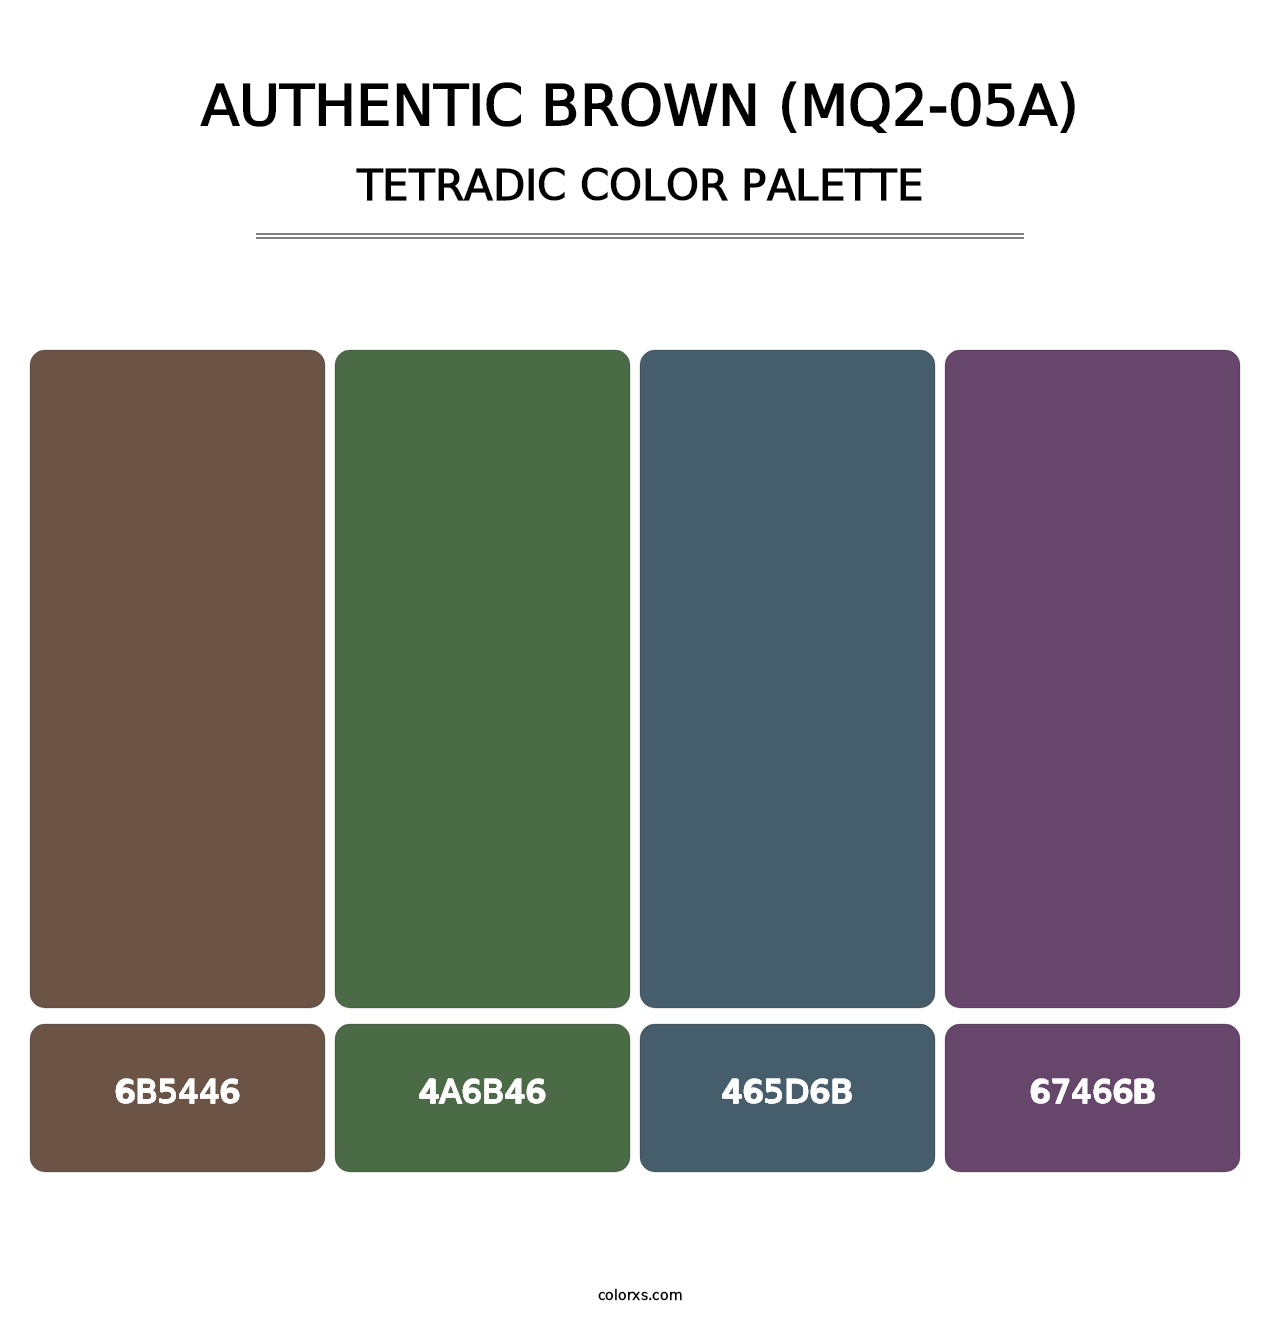 Authentic Brown (MQ2-05A) - Tetradic Color Palette